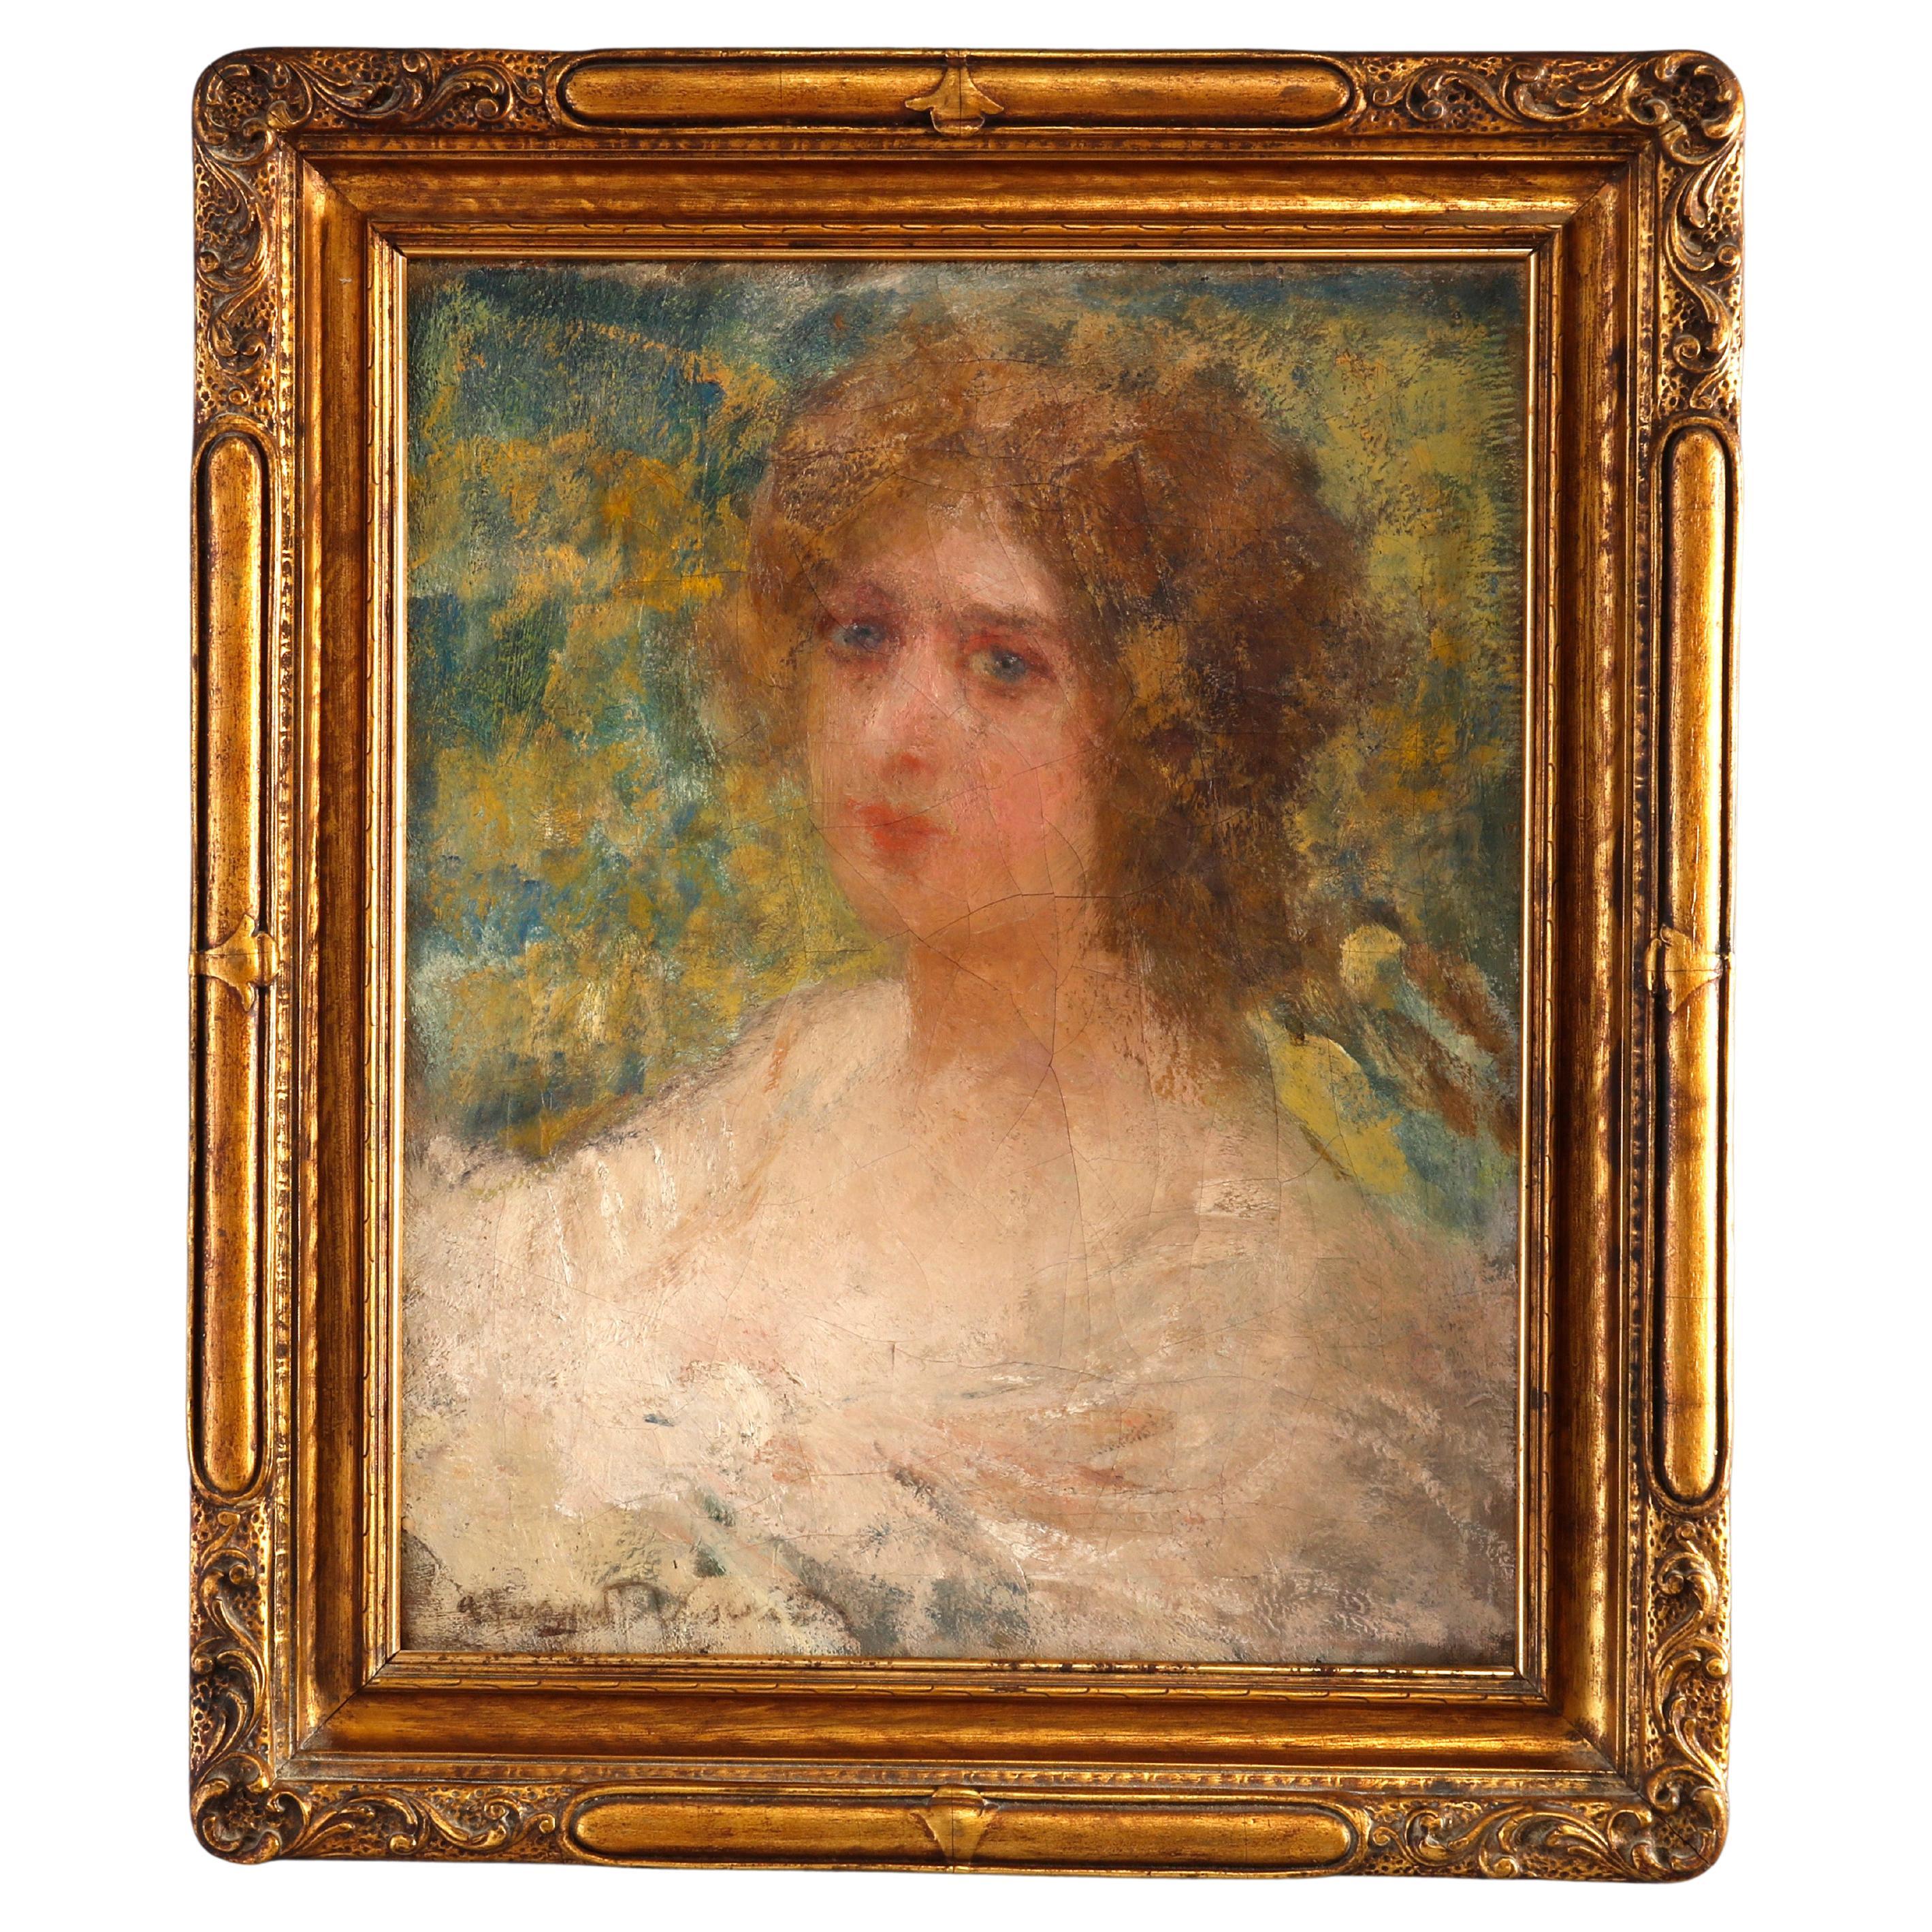 Antique Oil Painting, Impressionist Portrait of a Lady by Adolfo Visconti, c1900